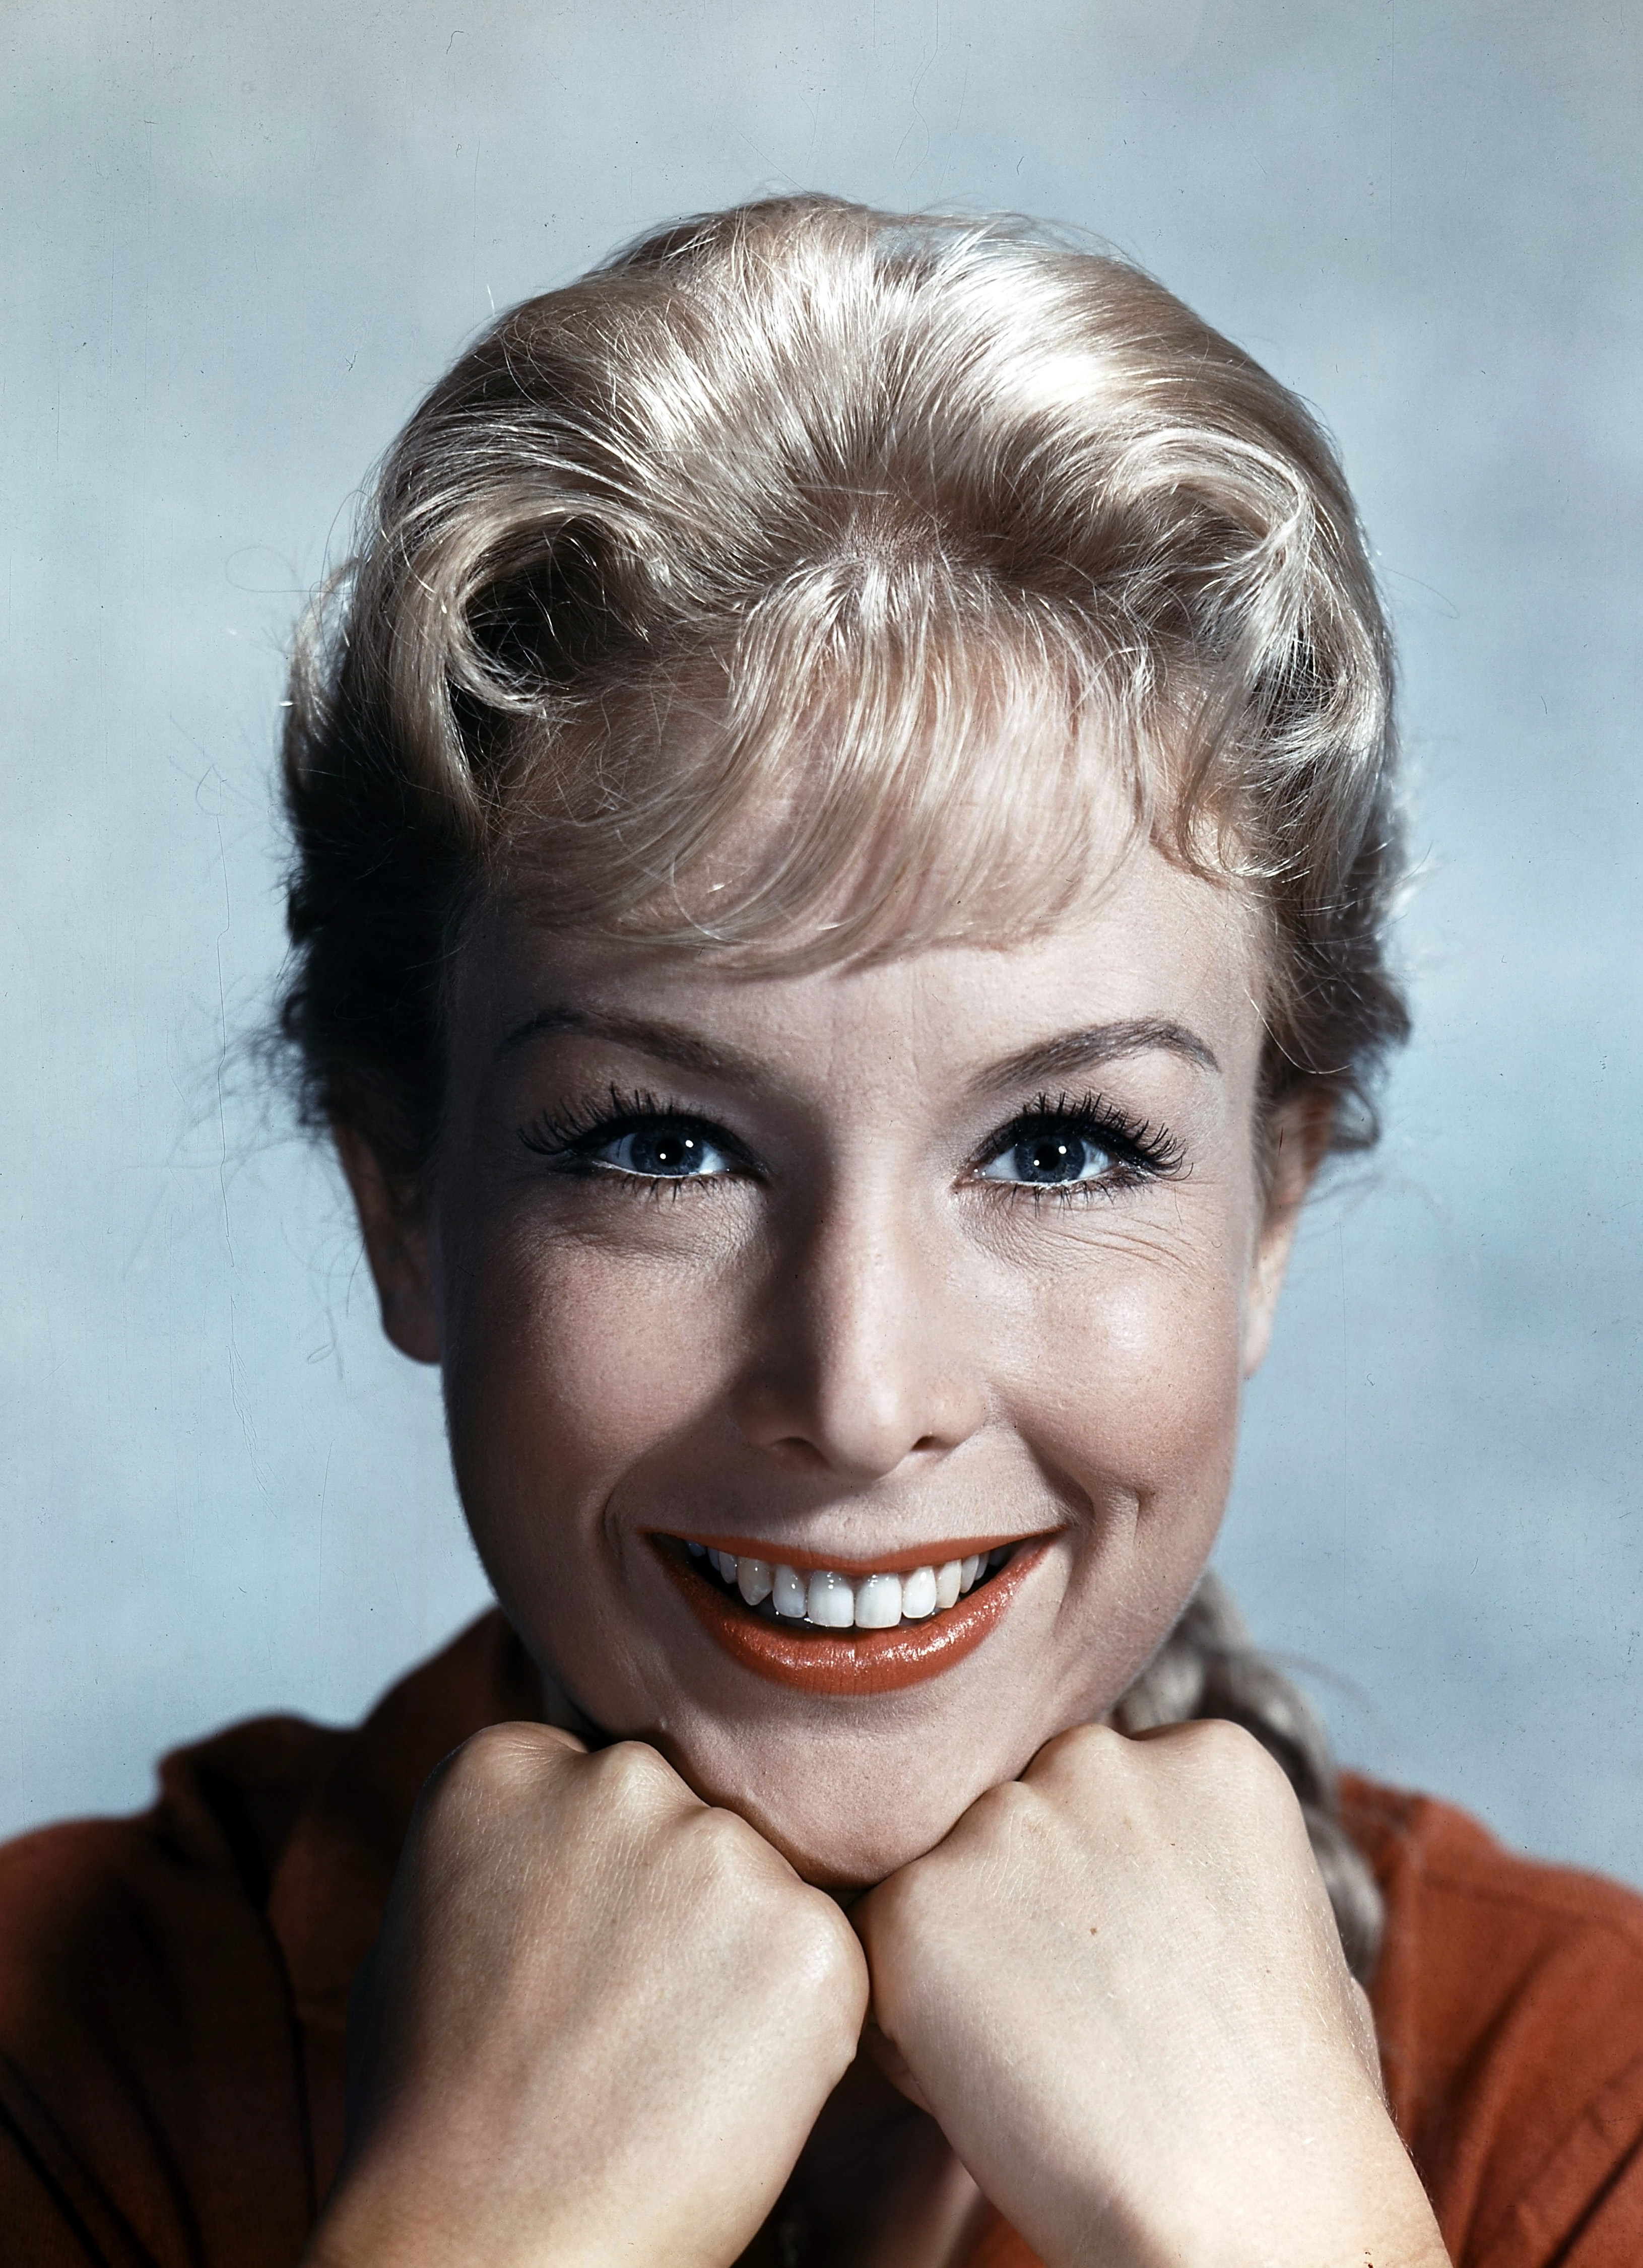 Barbara Eden poses for publicity portrait for the film "A Private's Affair," circa 1959 | Source: Getty Images